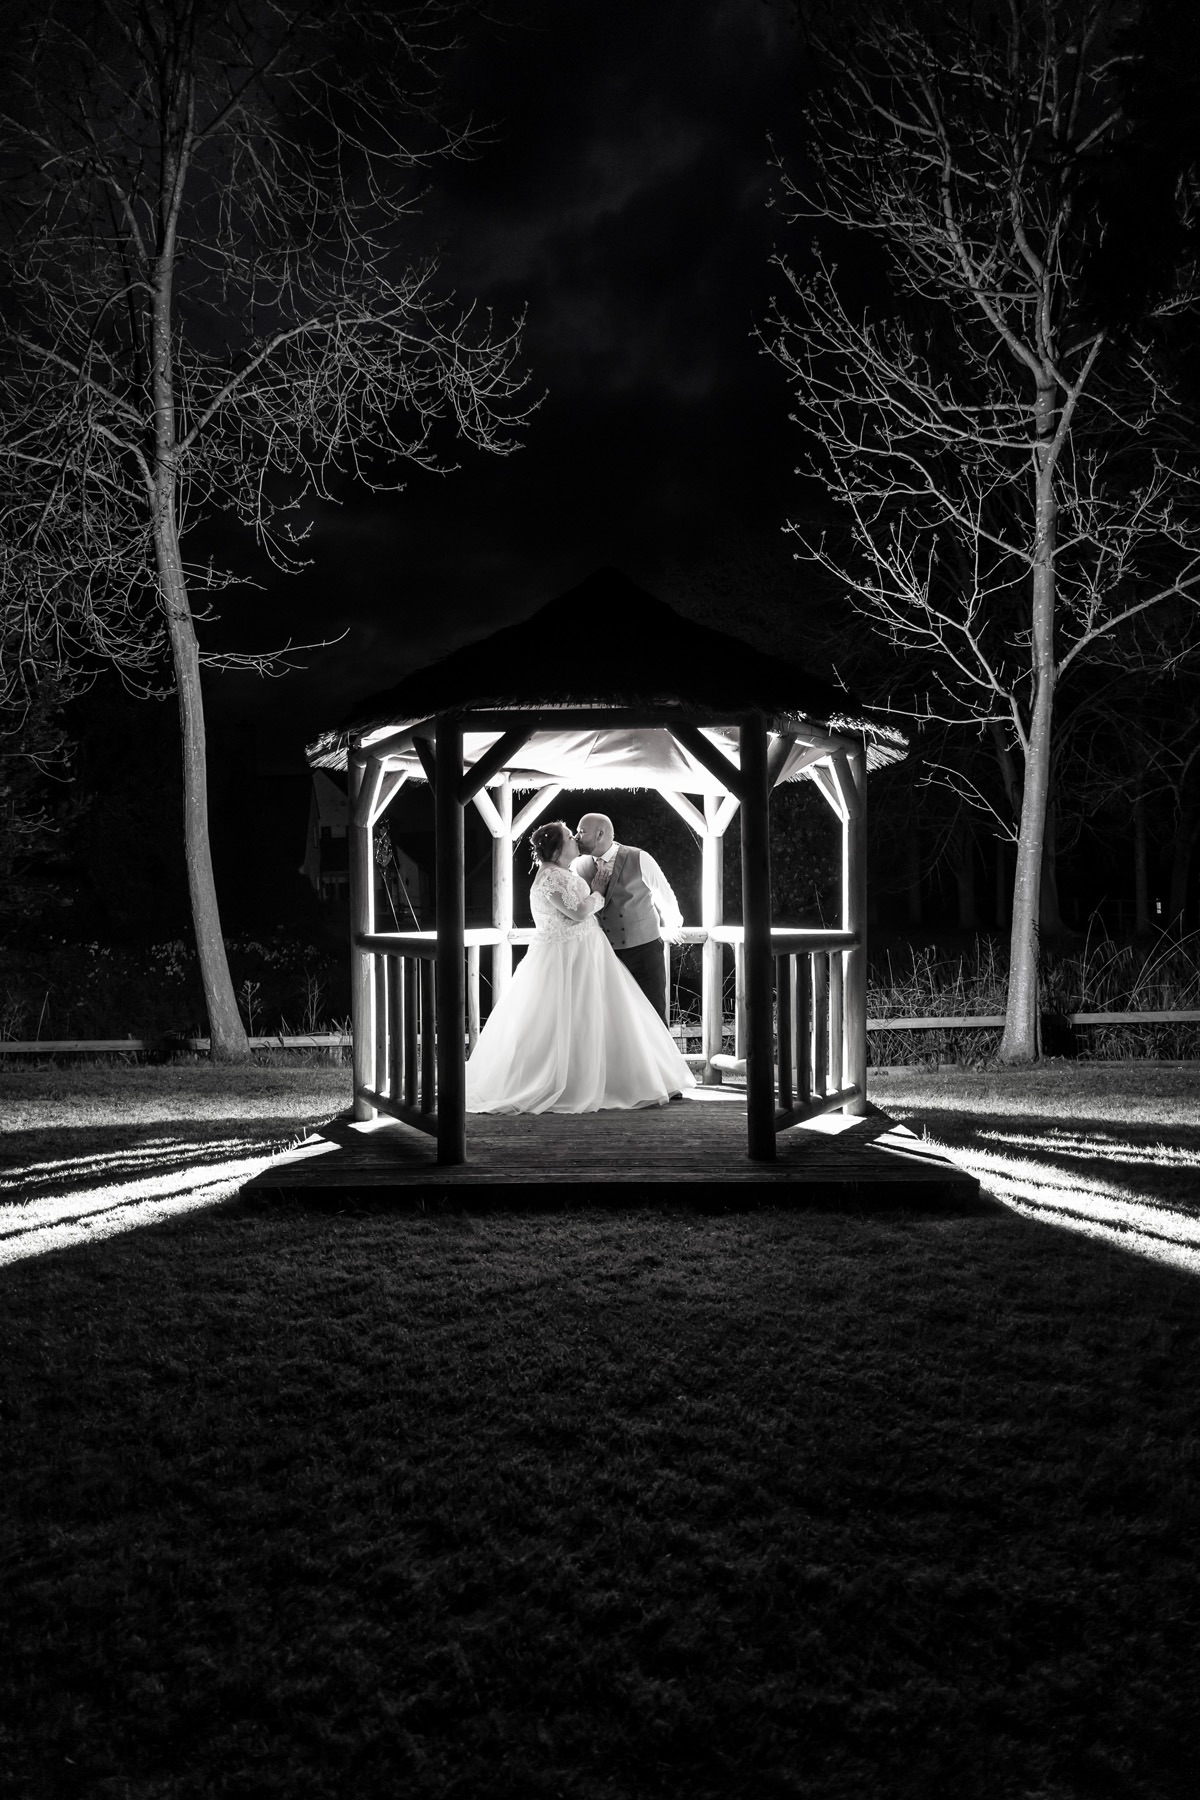 One of the night shots. Looks amazing in black & white